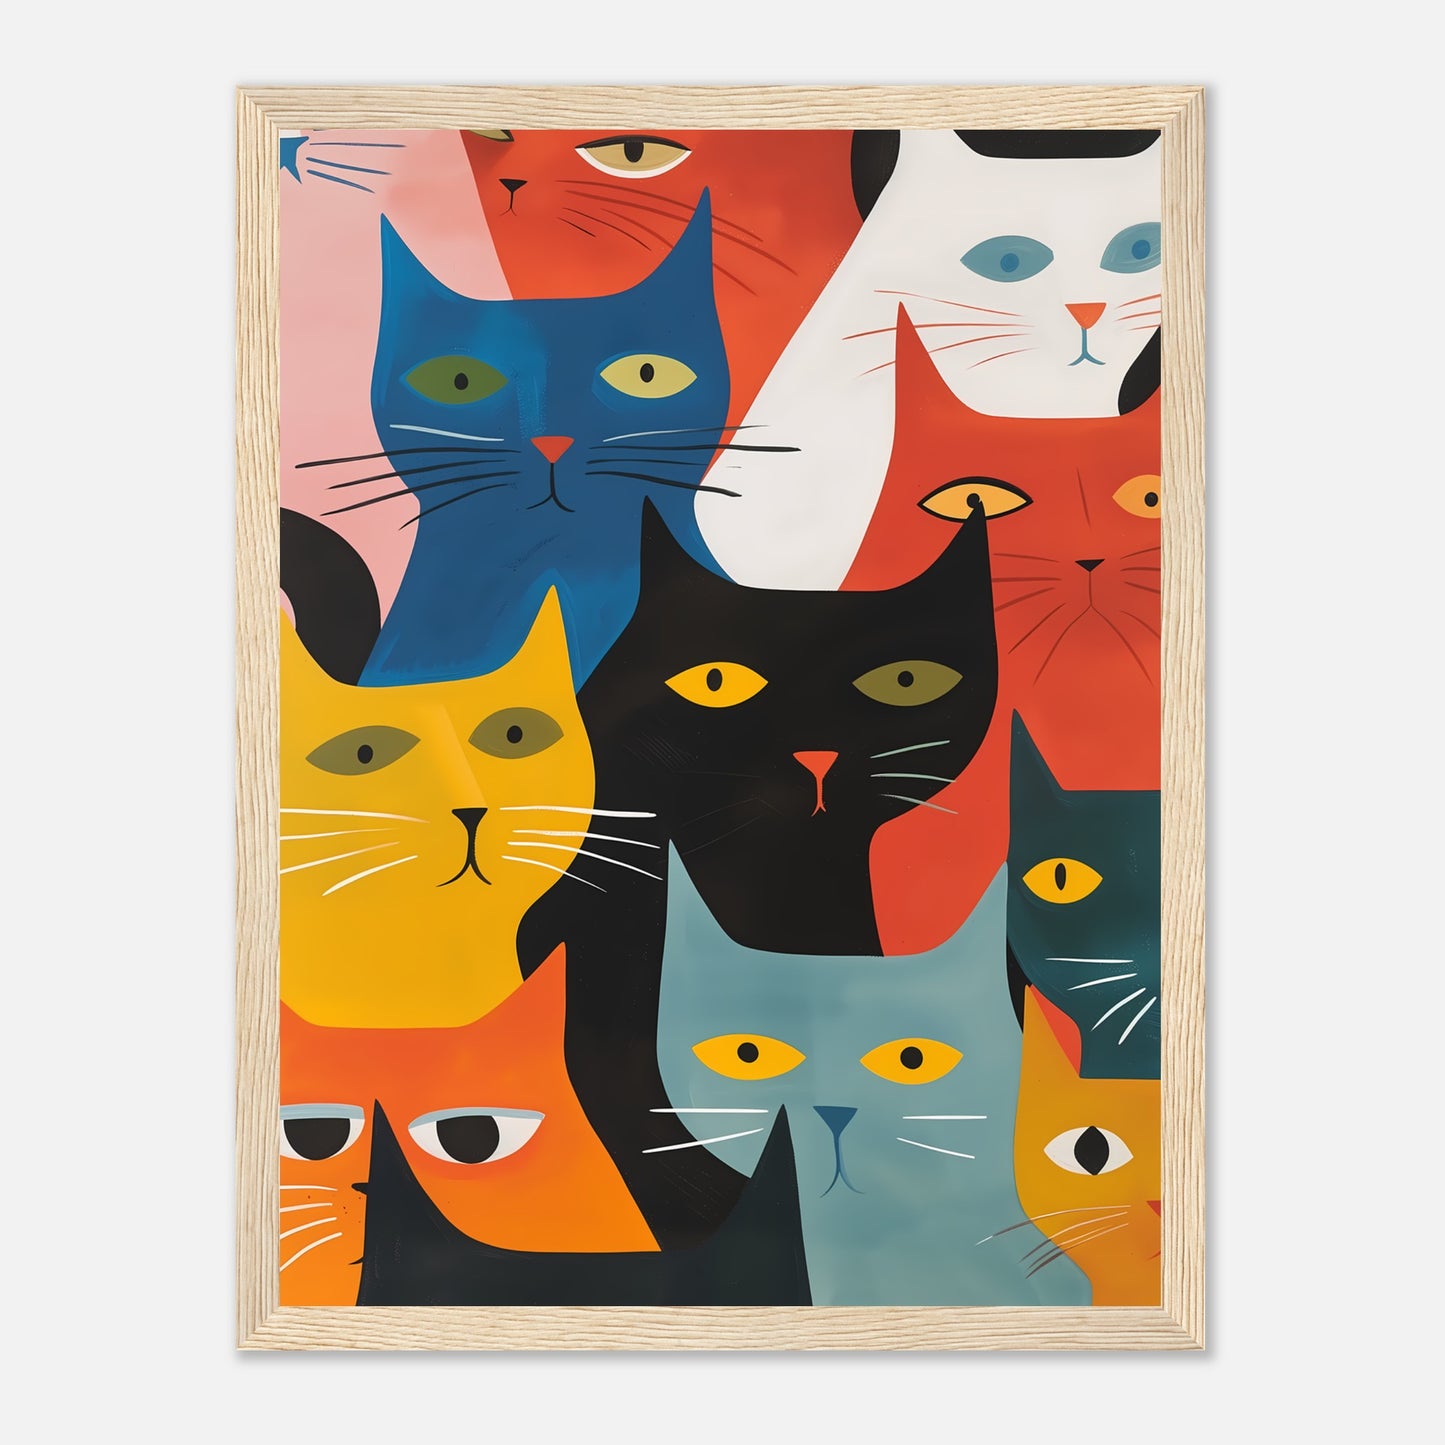 Colorful artistic illustration of various stylized cats on a canvas.